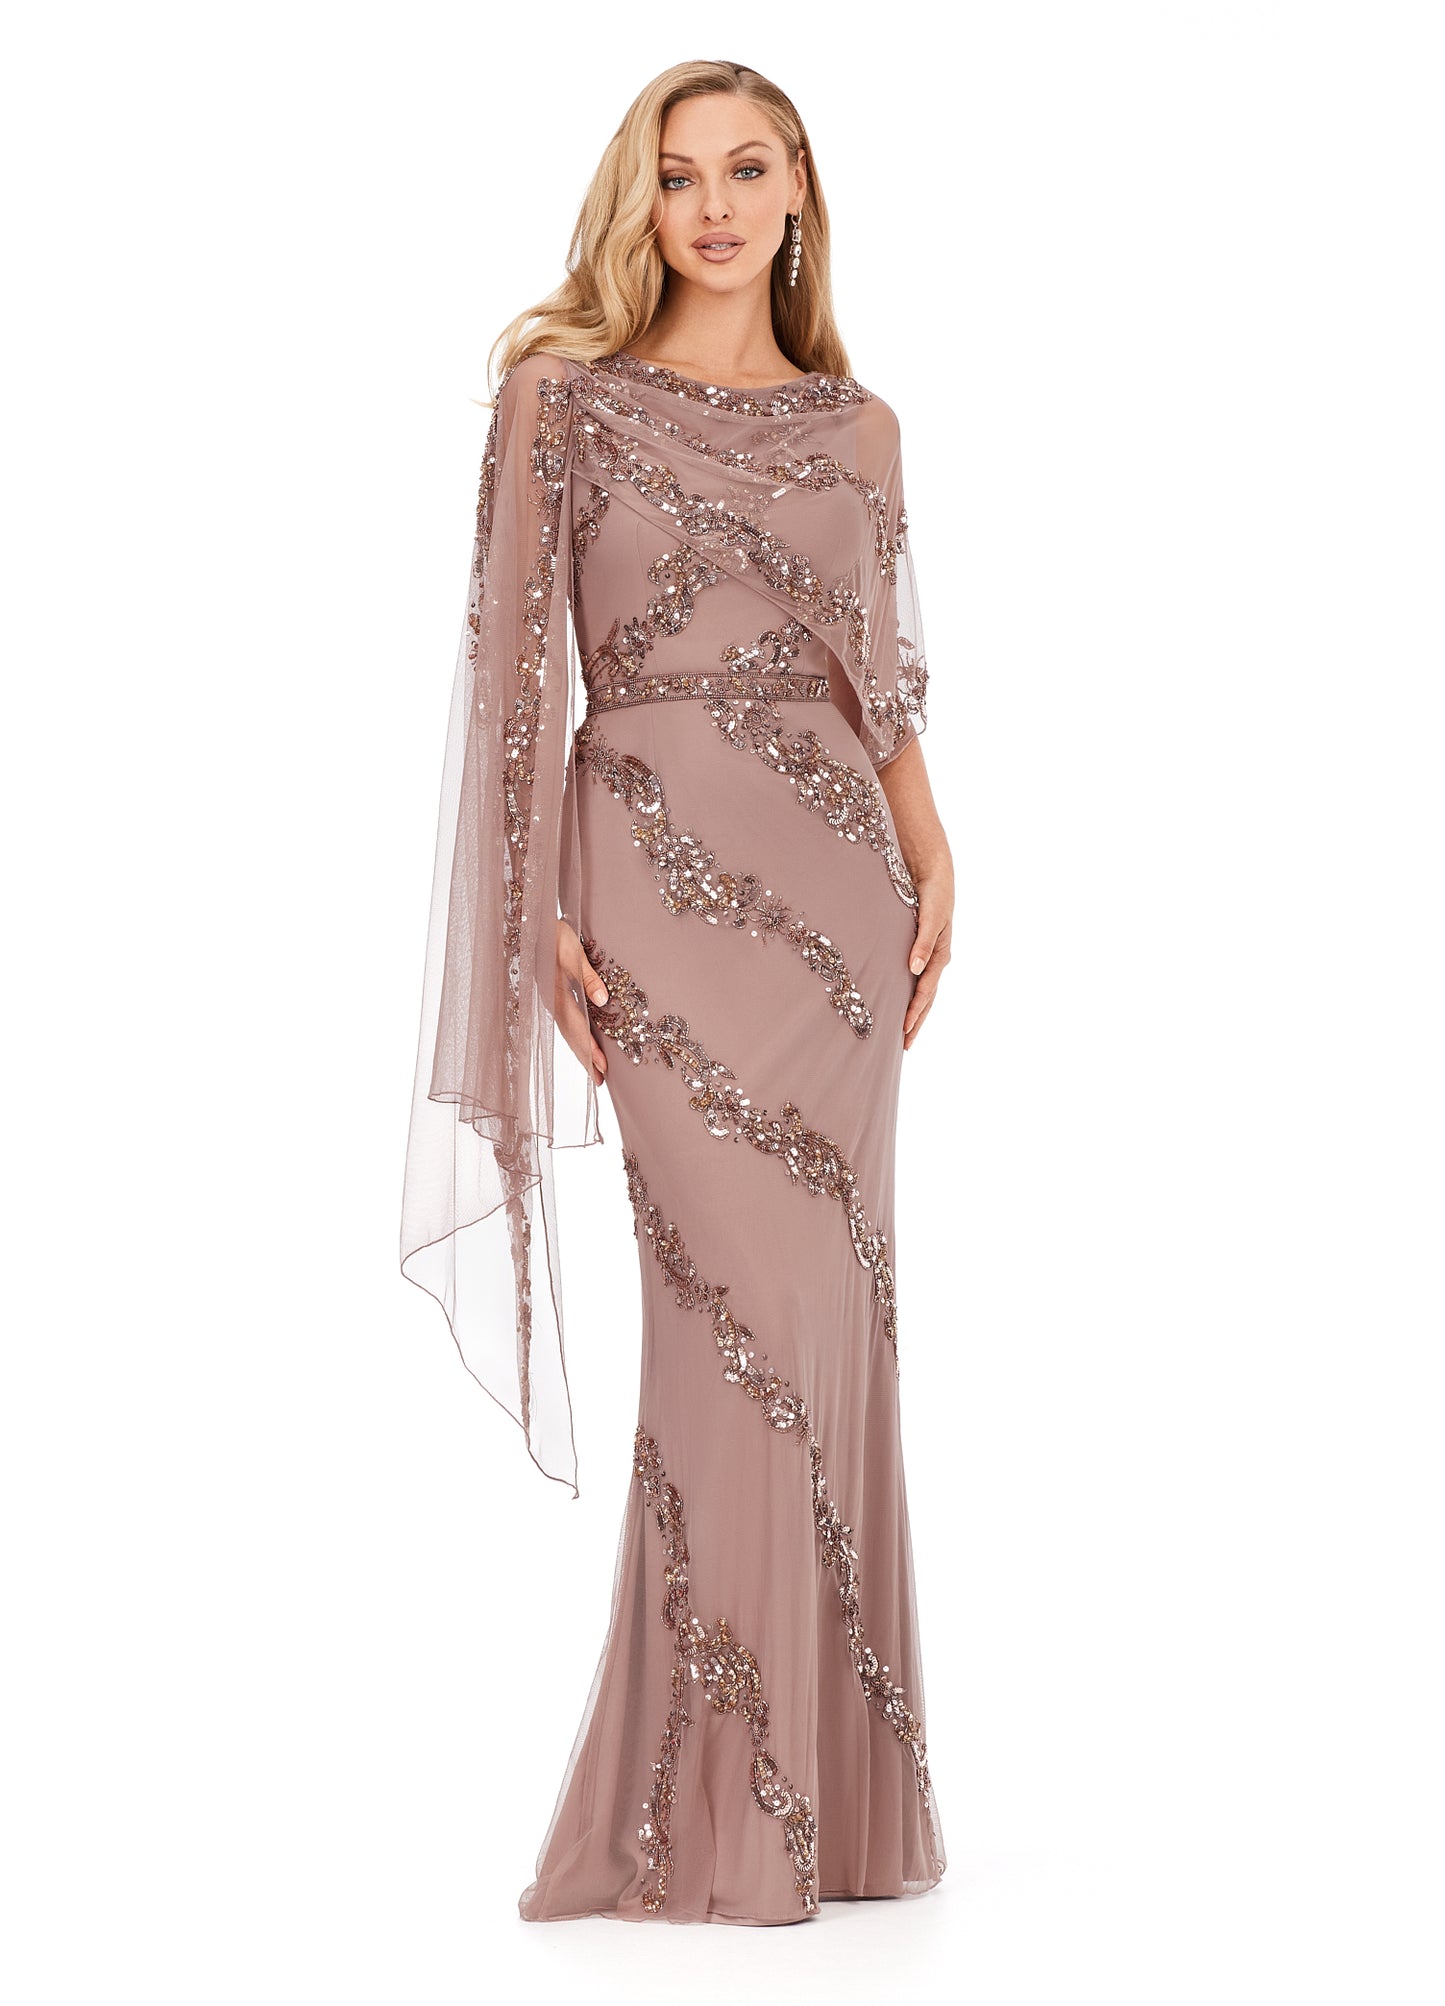 Ashley Lauren 11213 Asymmetric Detachable Overlay High Back Fully Hand Beaded Crew Neckline Evening Dress. This stunning evening gown is complete with an intricate bead motif. The bustier is adorned with an asymmetrical overlay which falls down the left arm.